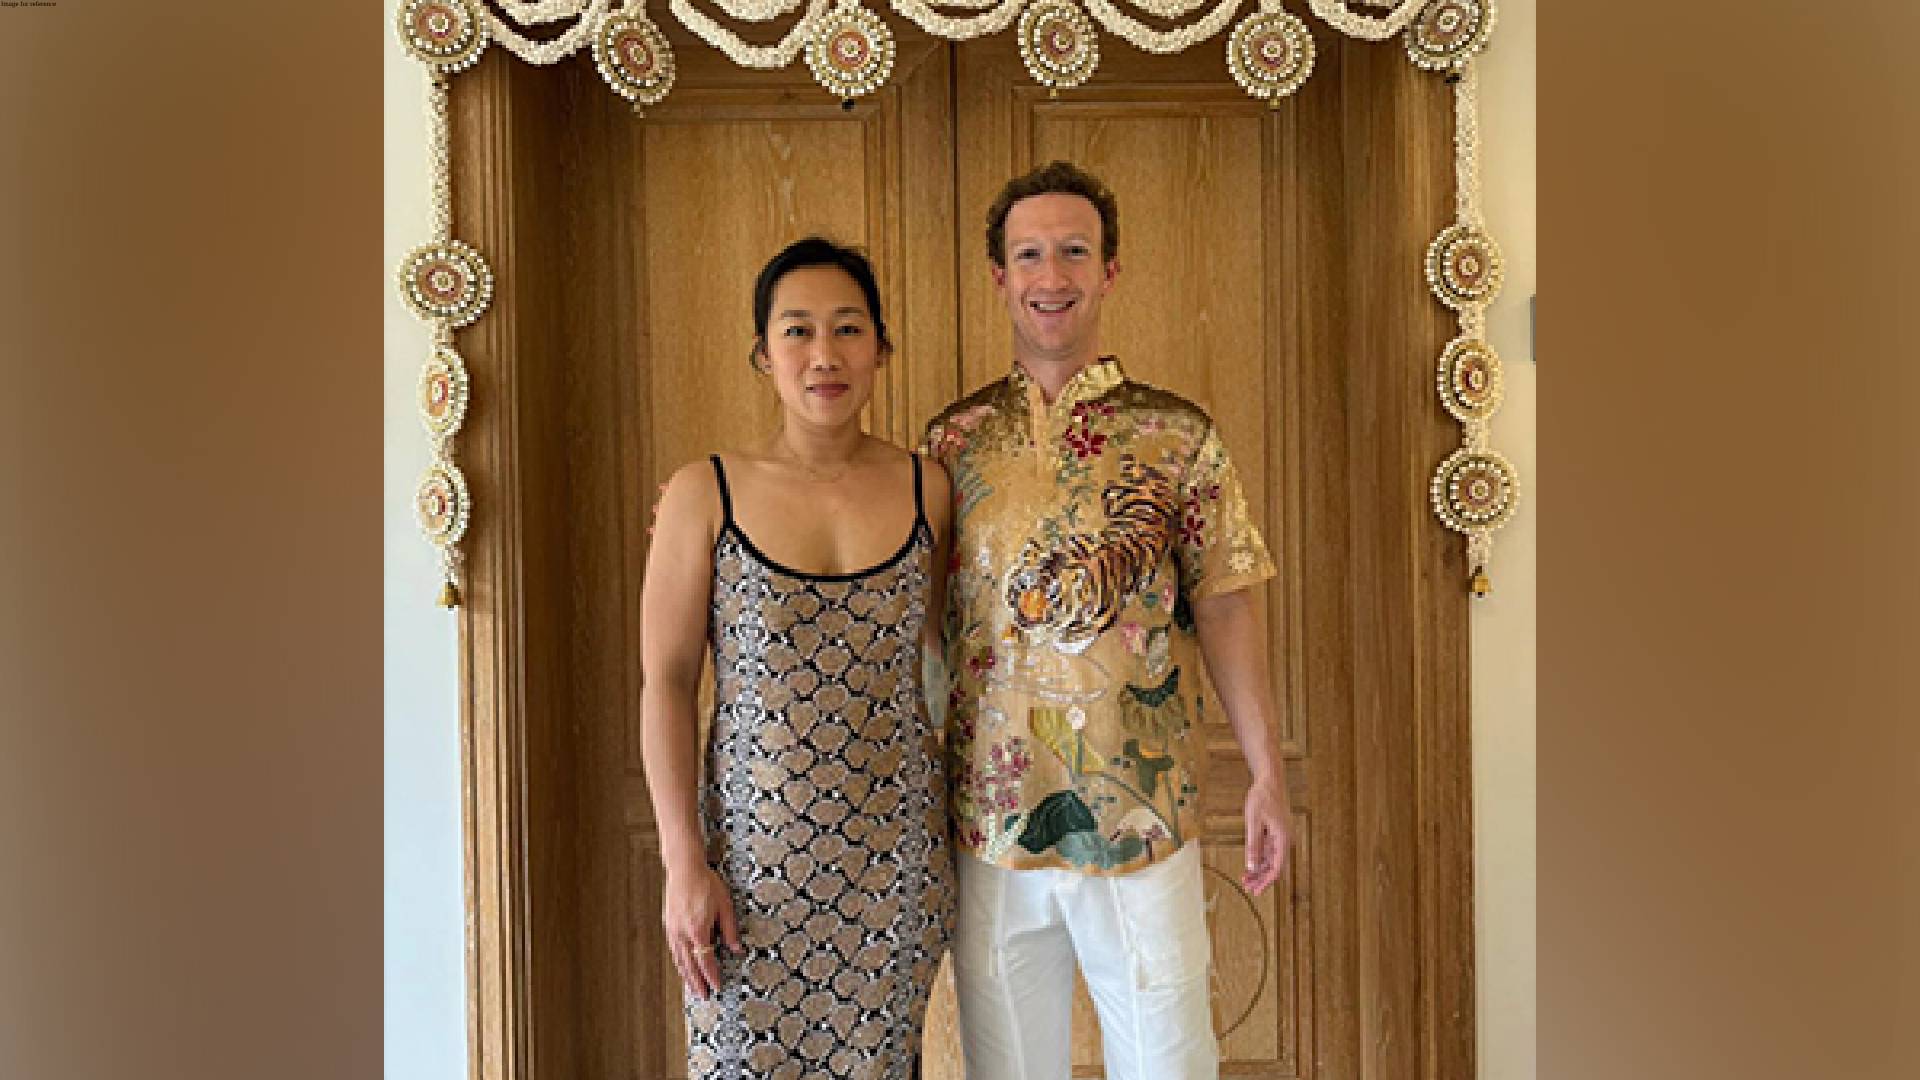 Mark Zuckerberg, wife Priscilla Chan ready for day 2 of Anant, Radhika's pre-wedding festivities in jungle themed outfits